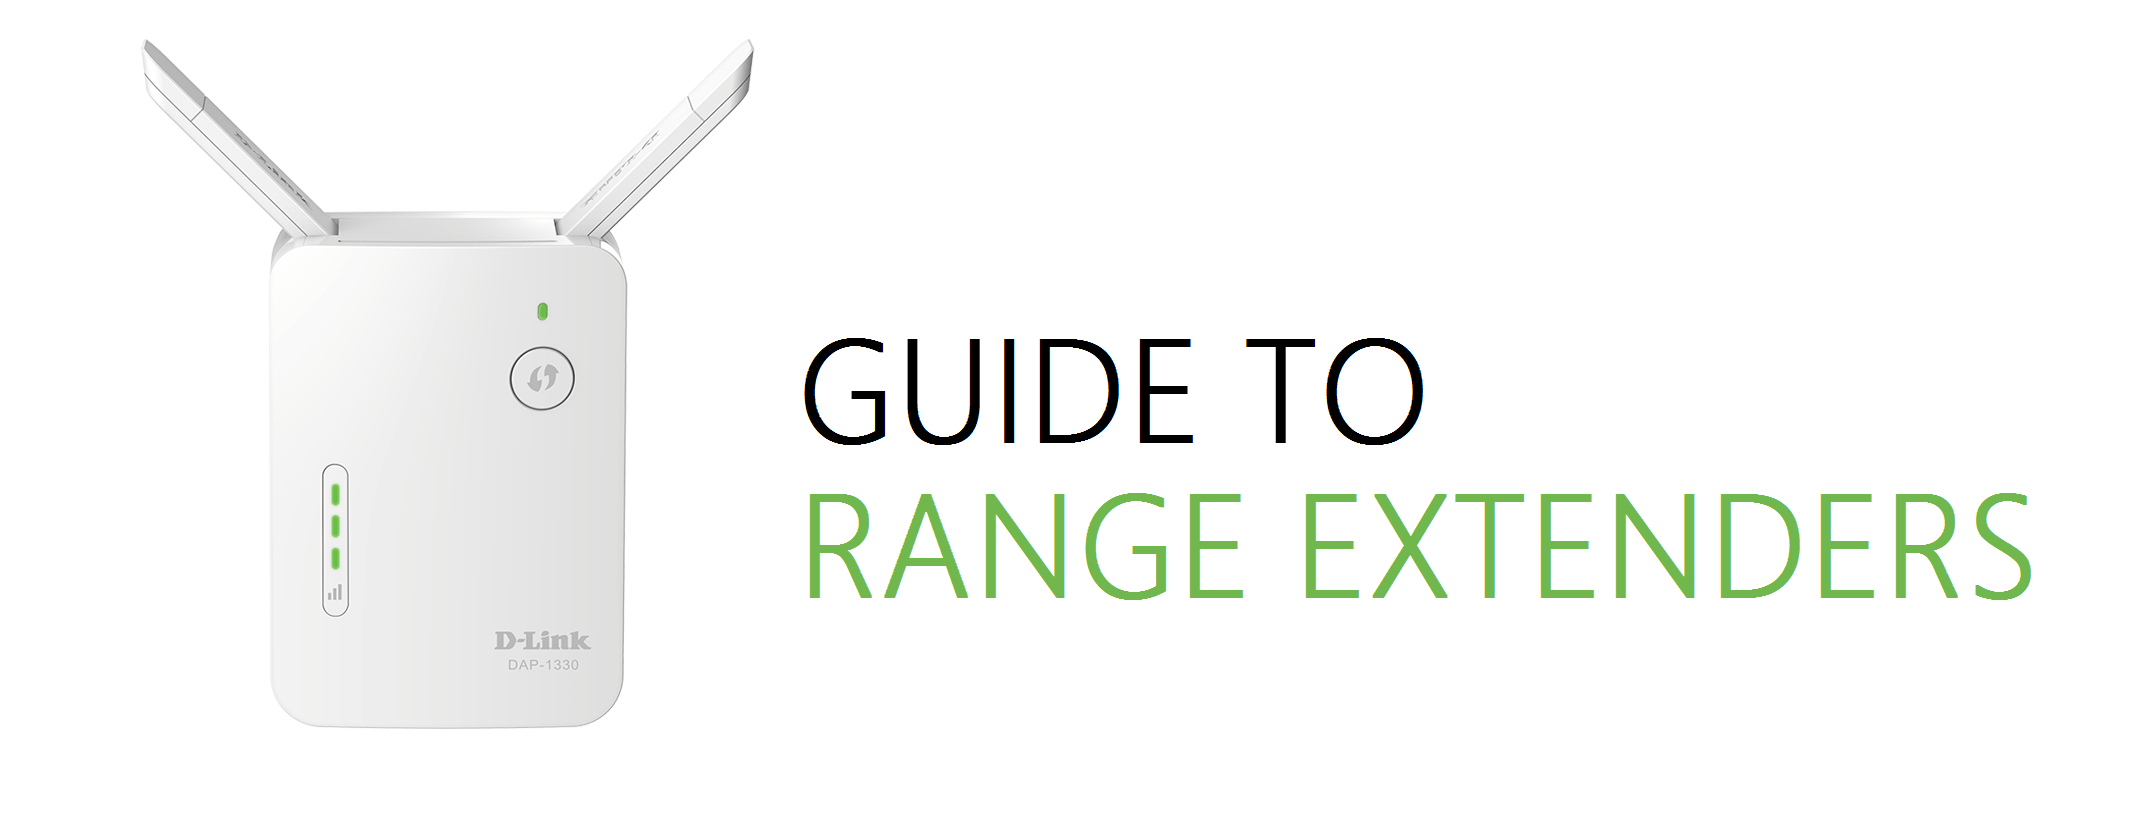 Guide to range extenders title